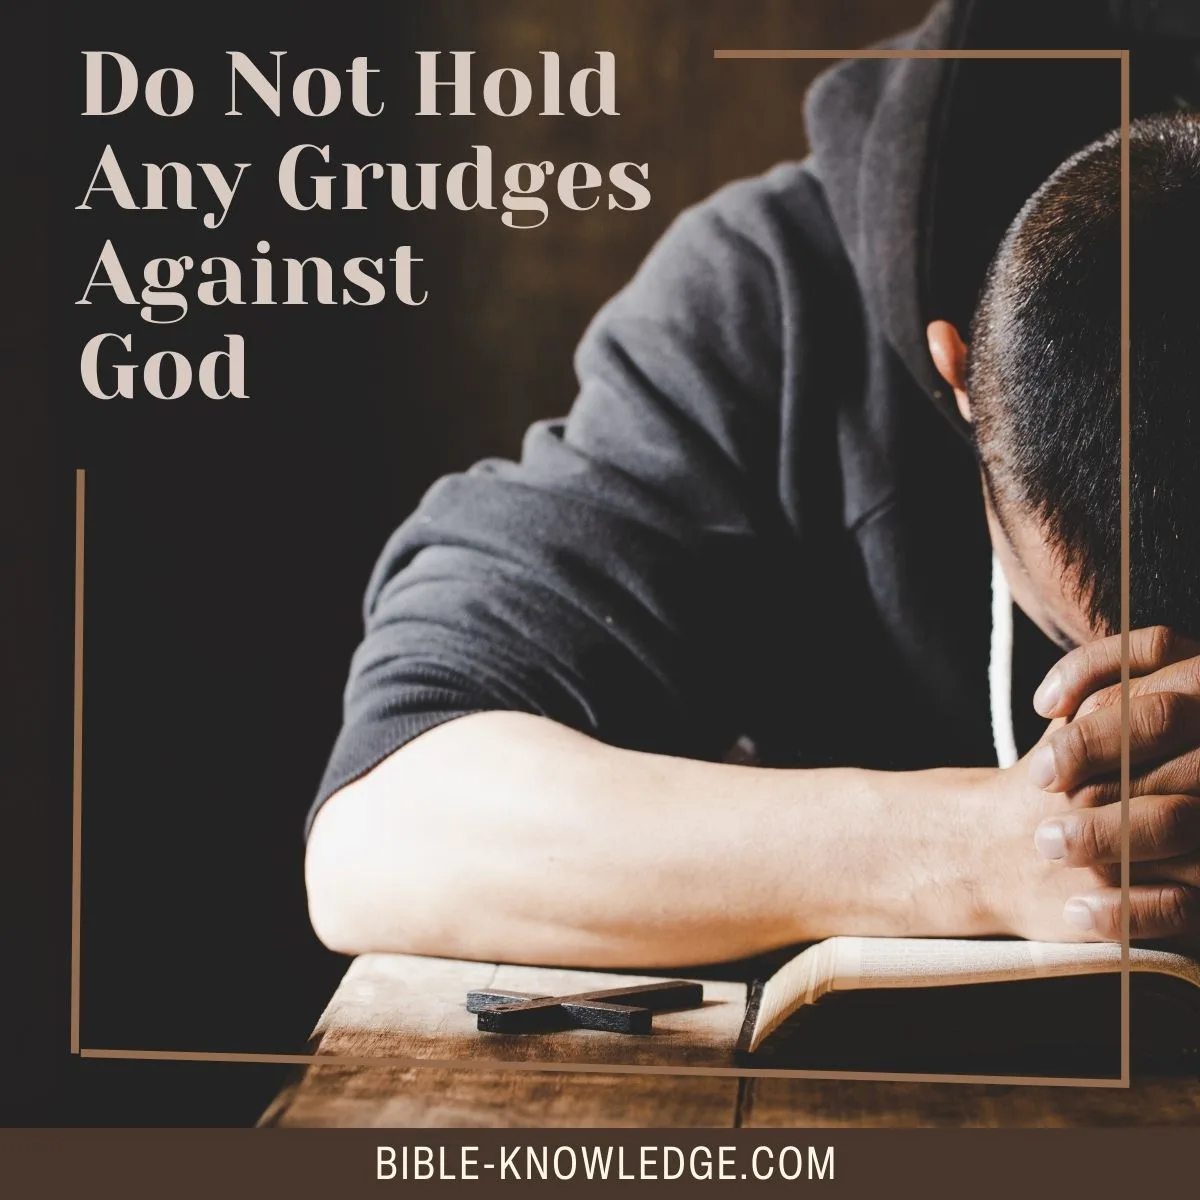 Do Not Hold Any Grudges Against God